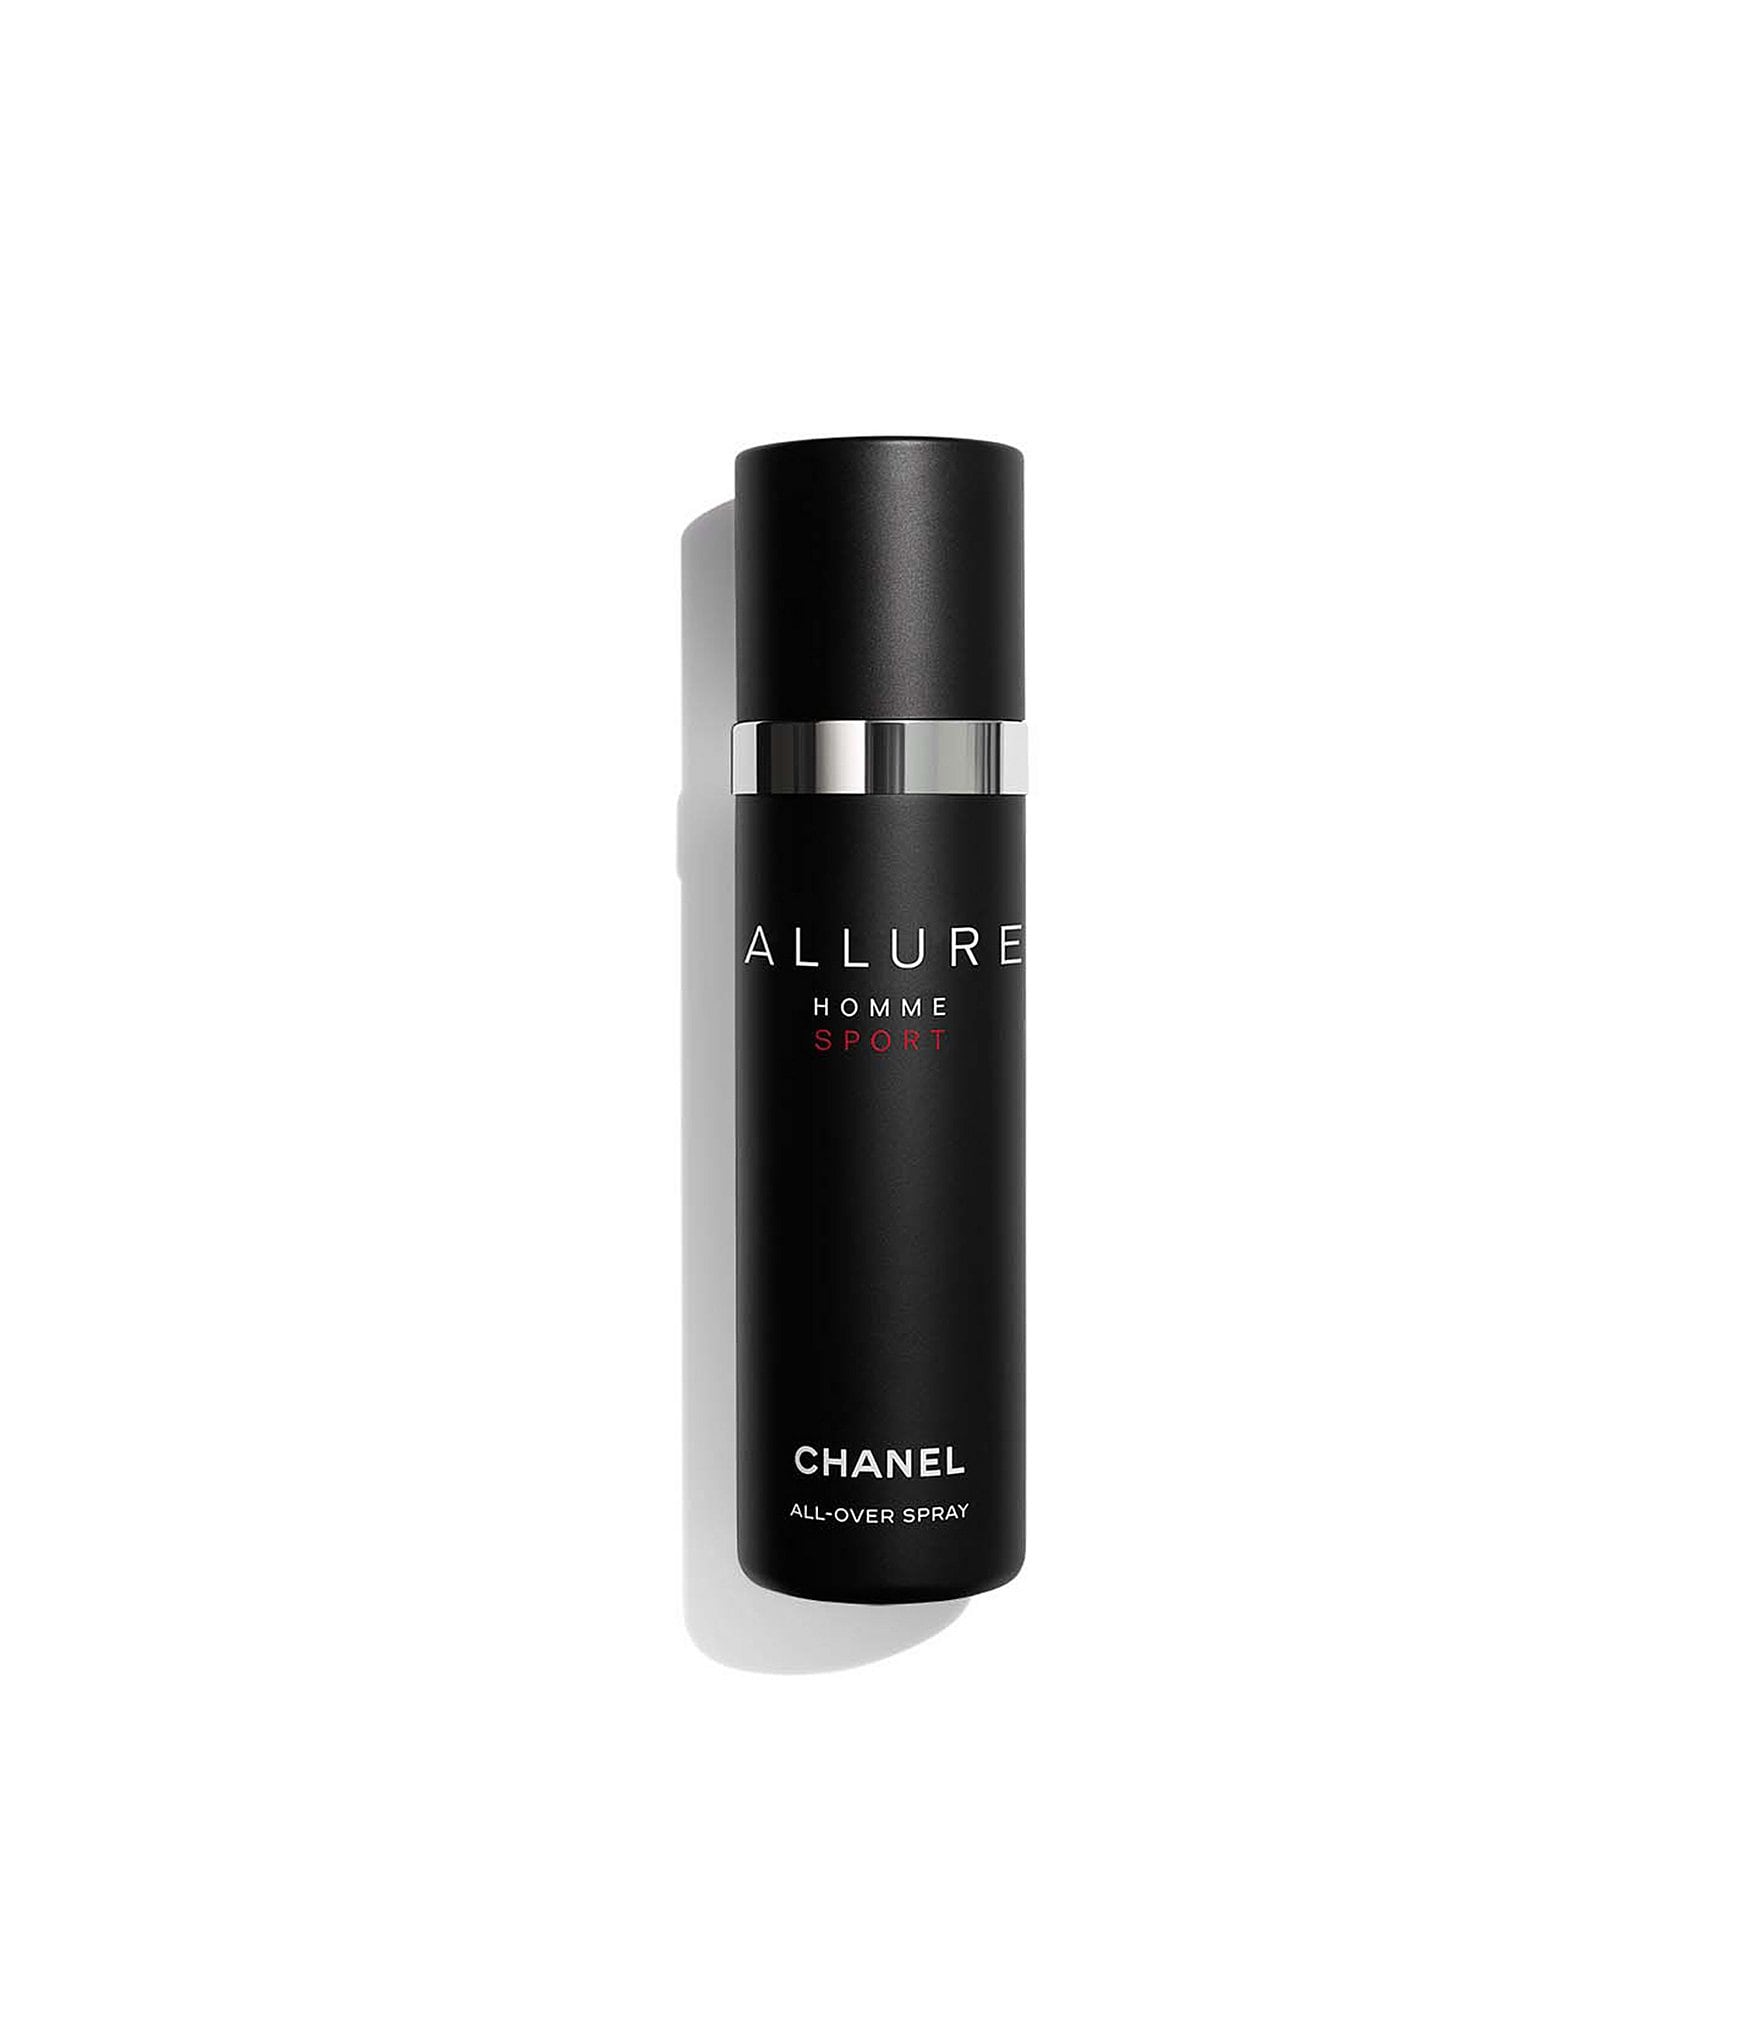  Allure Sport by Chanel for Men, Cologne Spray, 5 Ounce